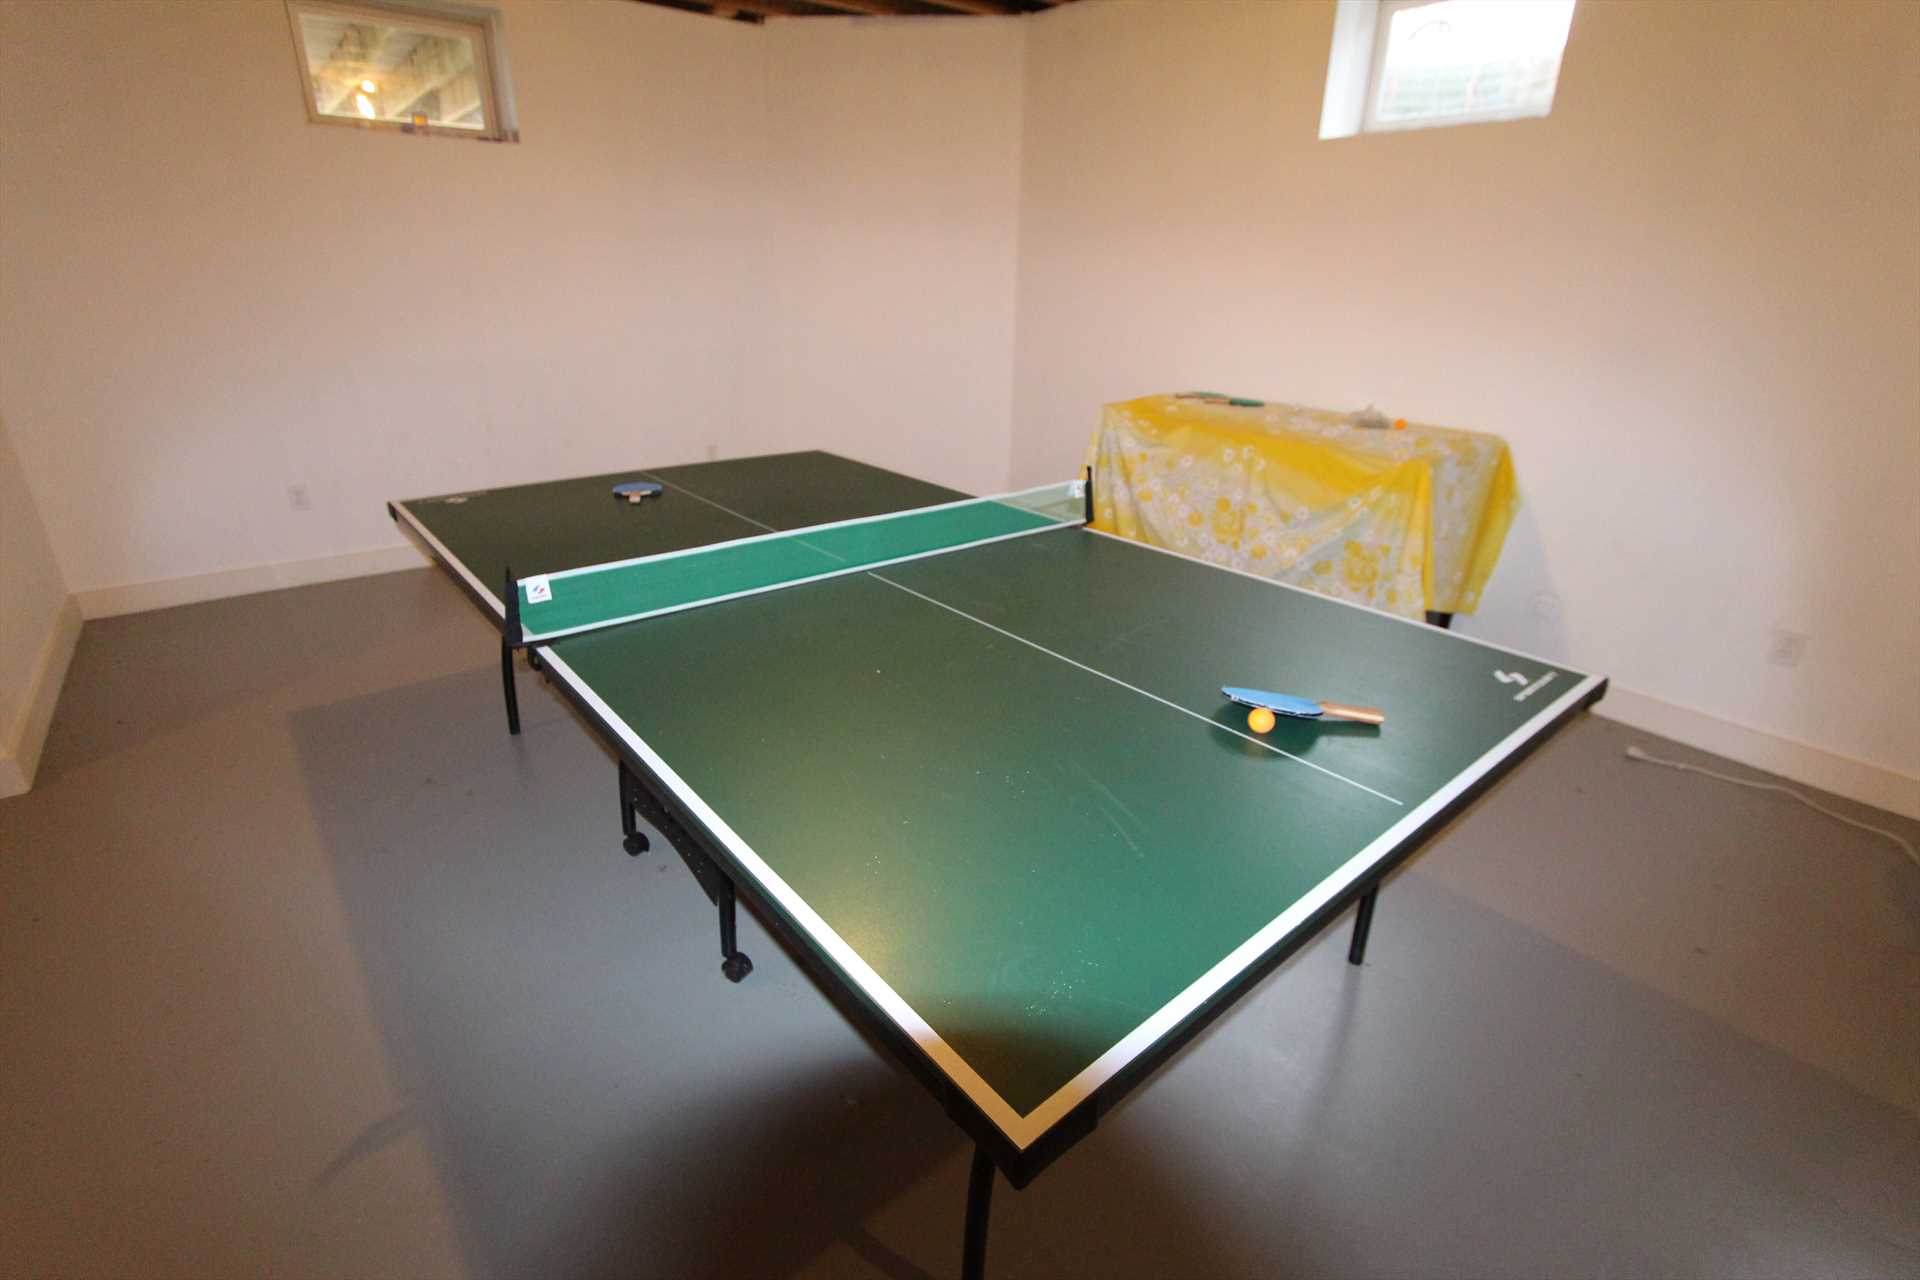 Ping pong table in basement